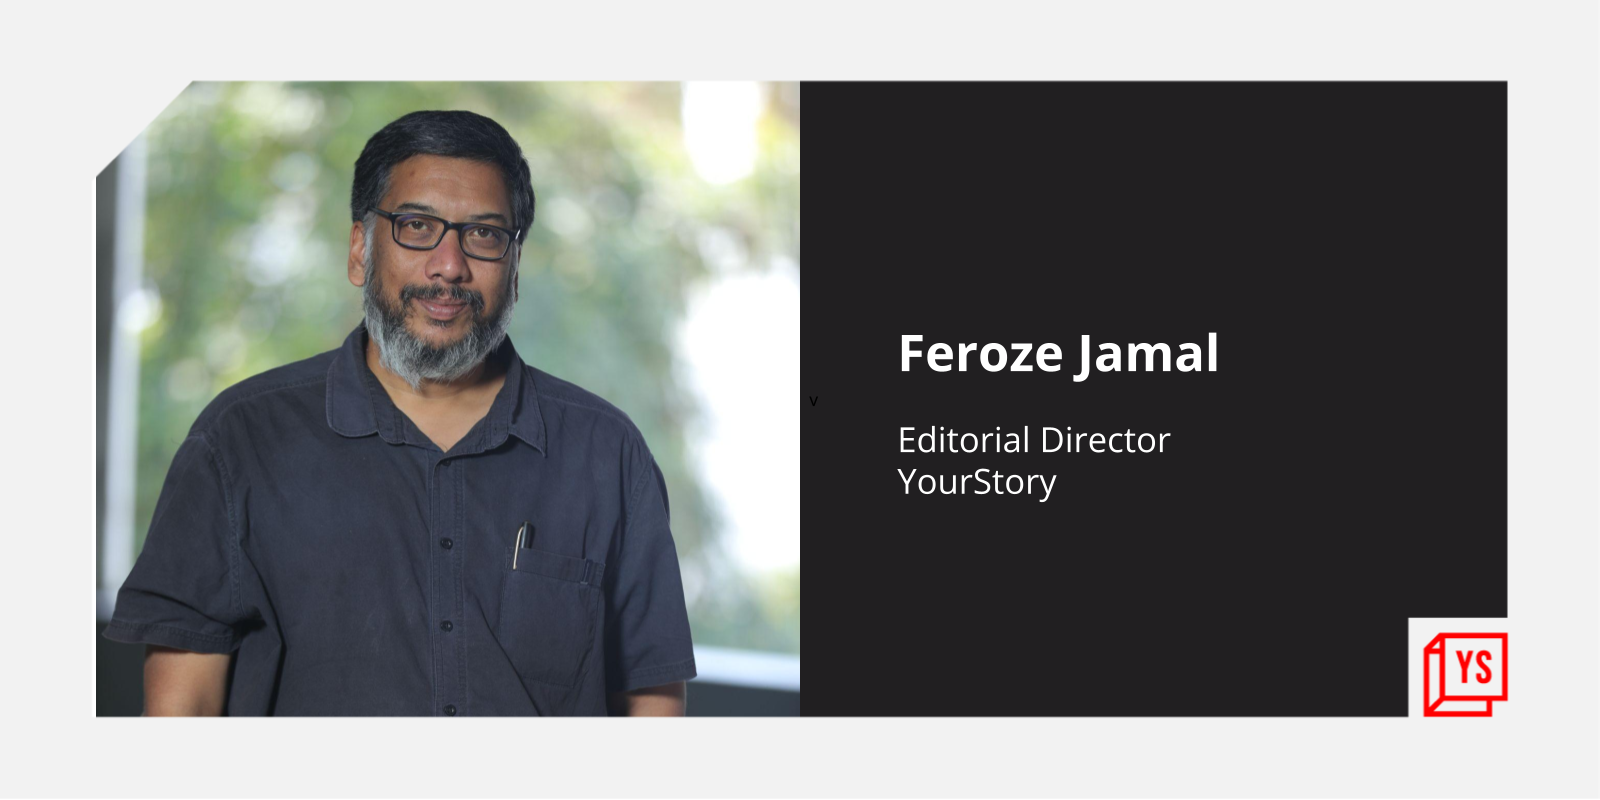 Feroze Jamal to join YourStory as Editorial Director